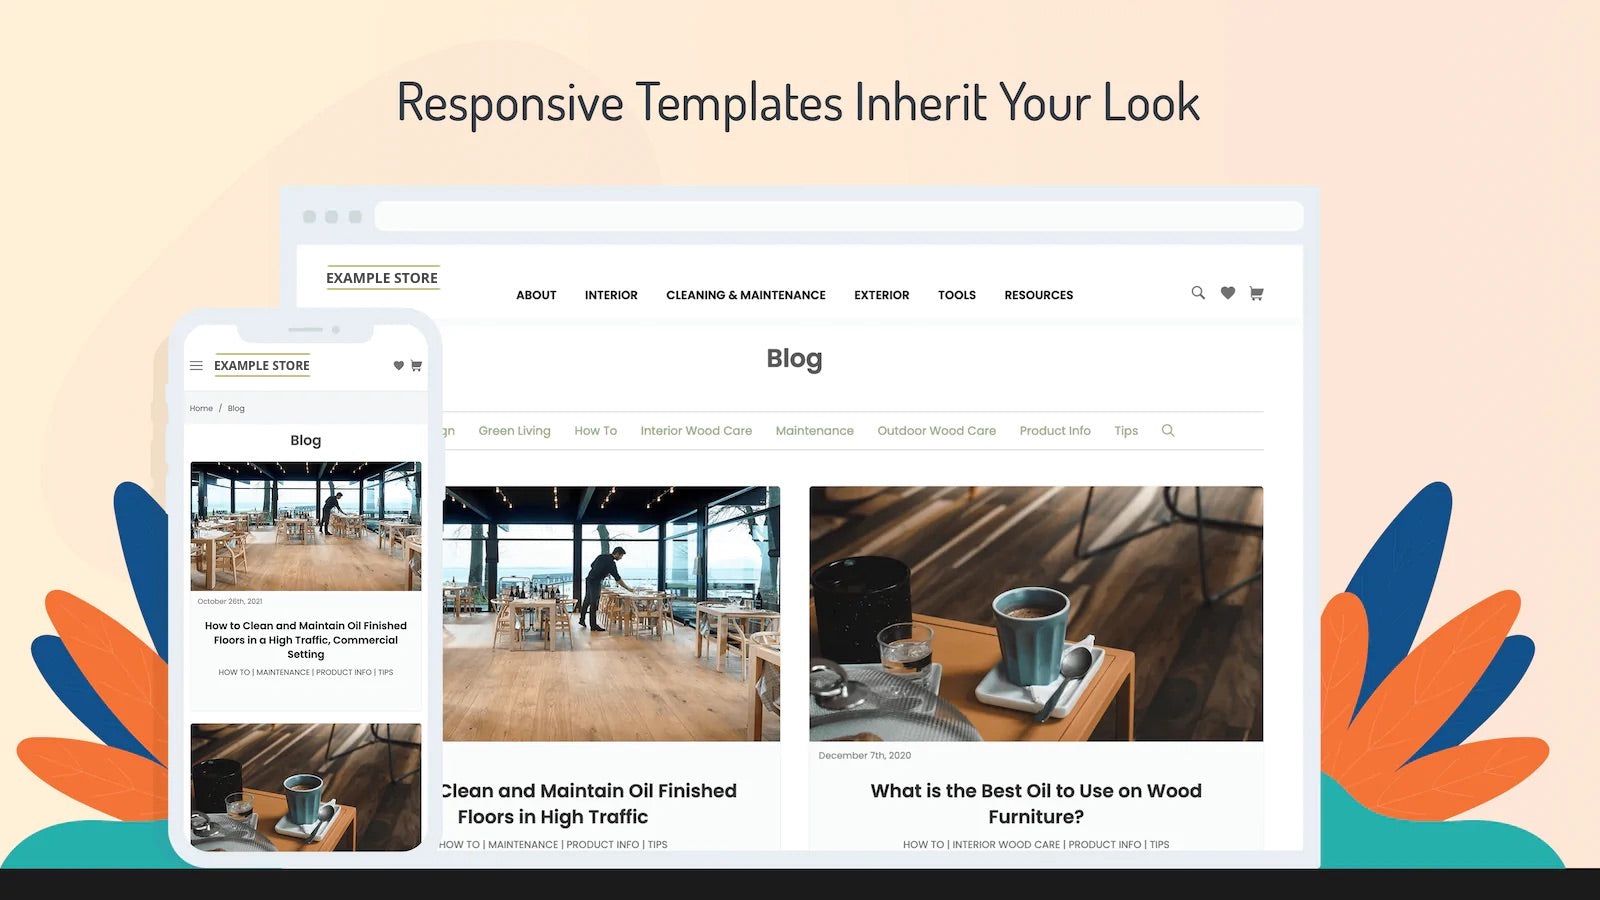 Responsive SEO Friendly Blog Templates and Related Blog Posts